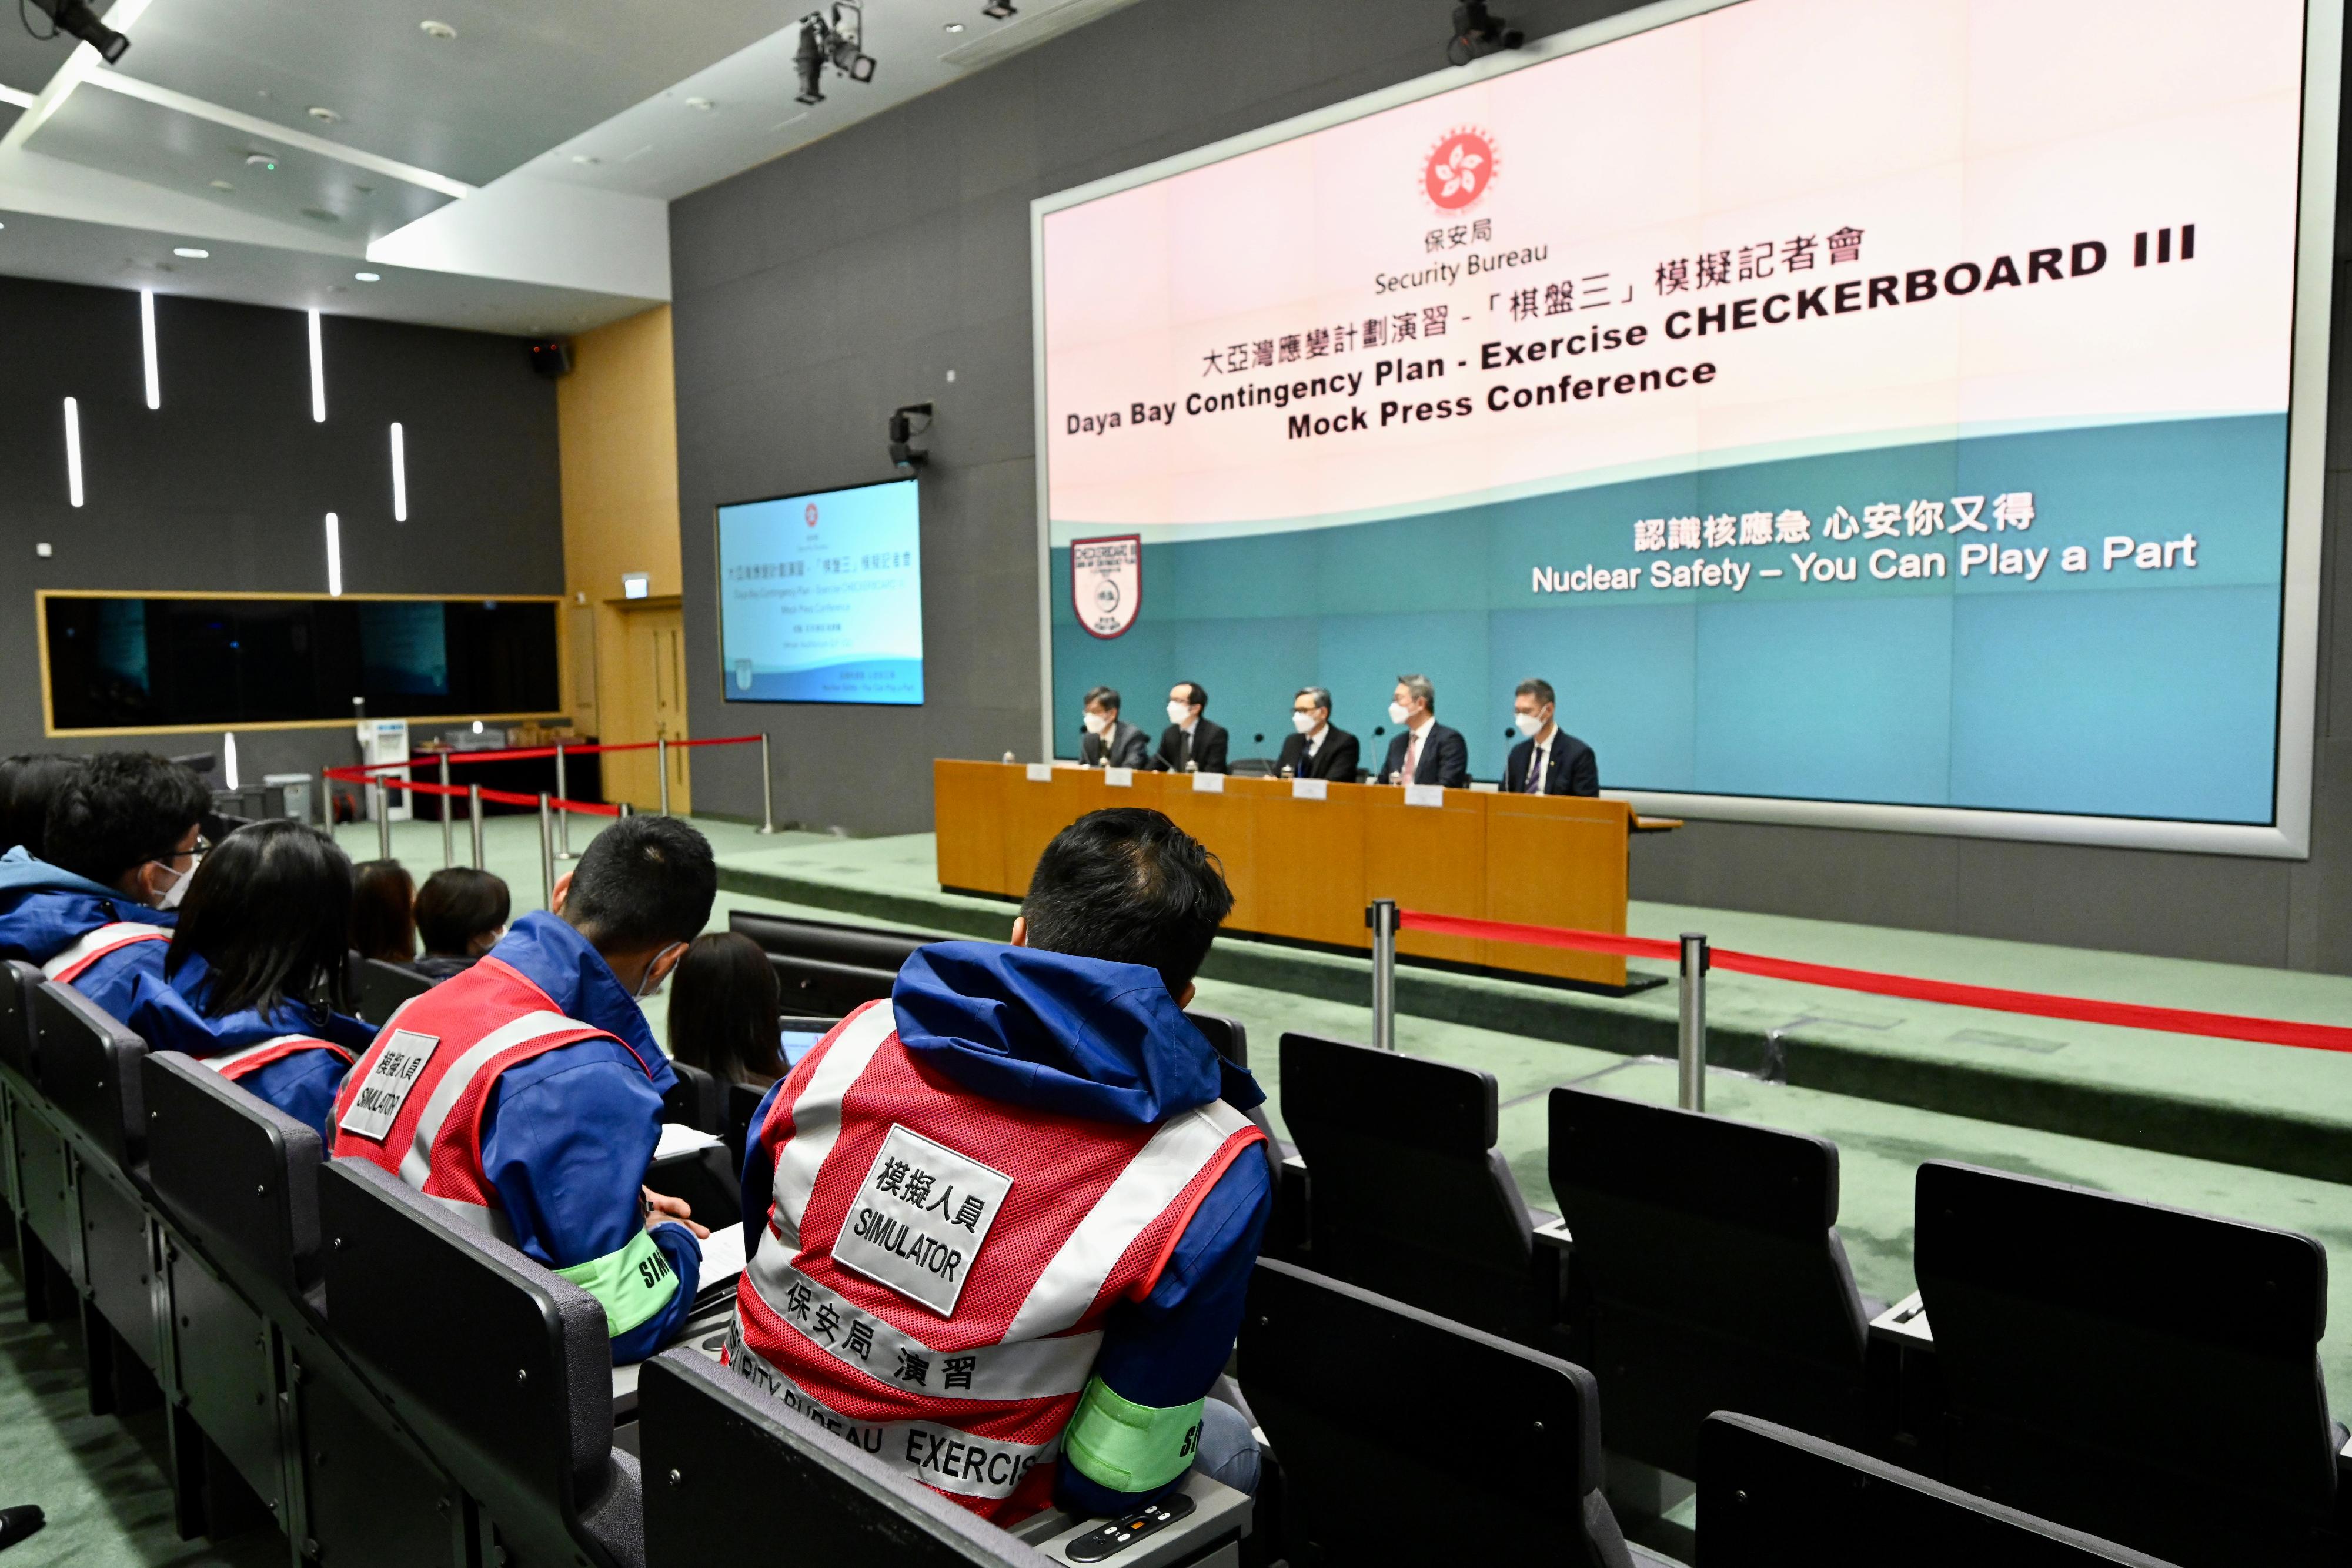 The Government conducted an inter-departmental exercise, "Checkerboard III", today (January 12). Photo shows the representatives of the Security Bureau, the Hong Kong Observatory, the Department of Health, the Electrical and Mechanical Services Department and the Food and Environmental Hygiene Department simulating a press conference to provide the public with comprehensive information.